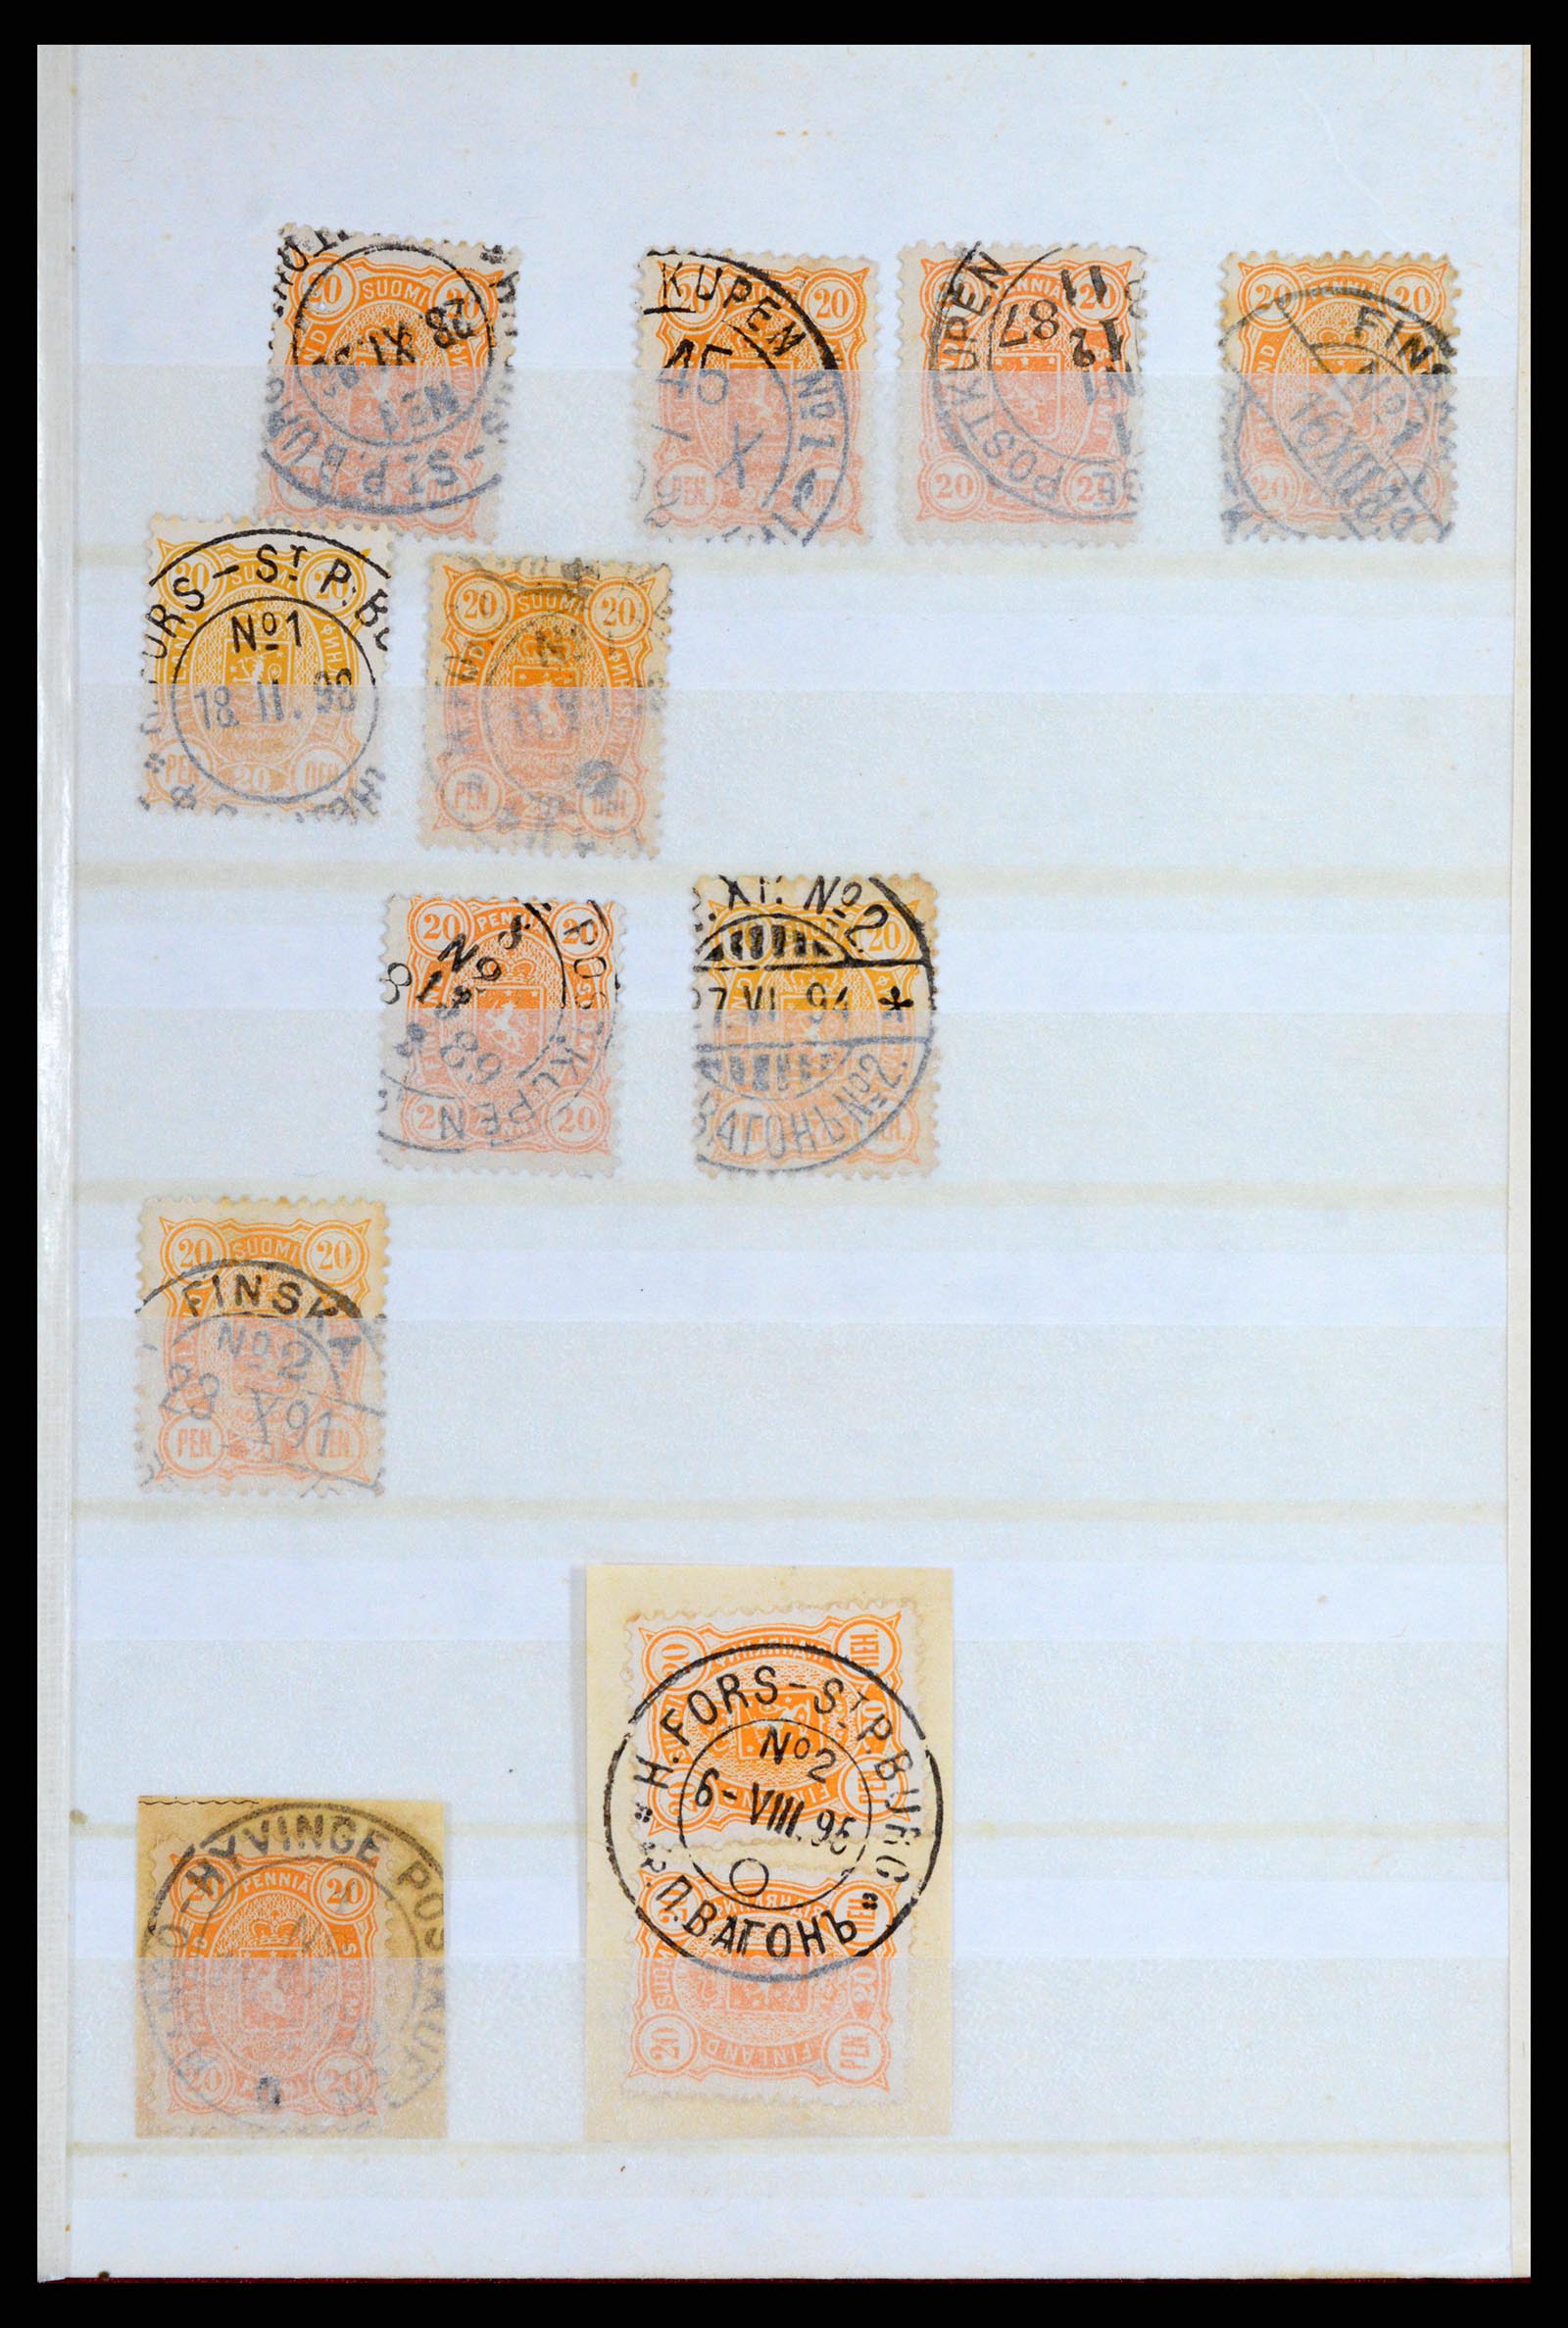 37766 174 - Stamp collection 37766 Finland railway cancellations 1870-1950.